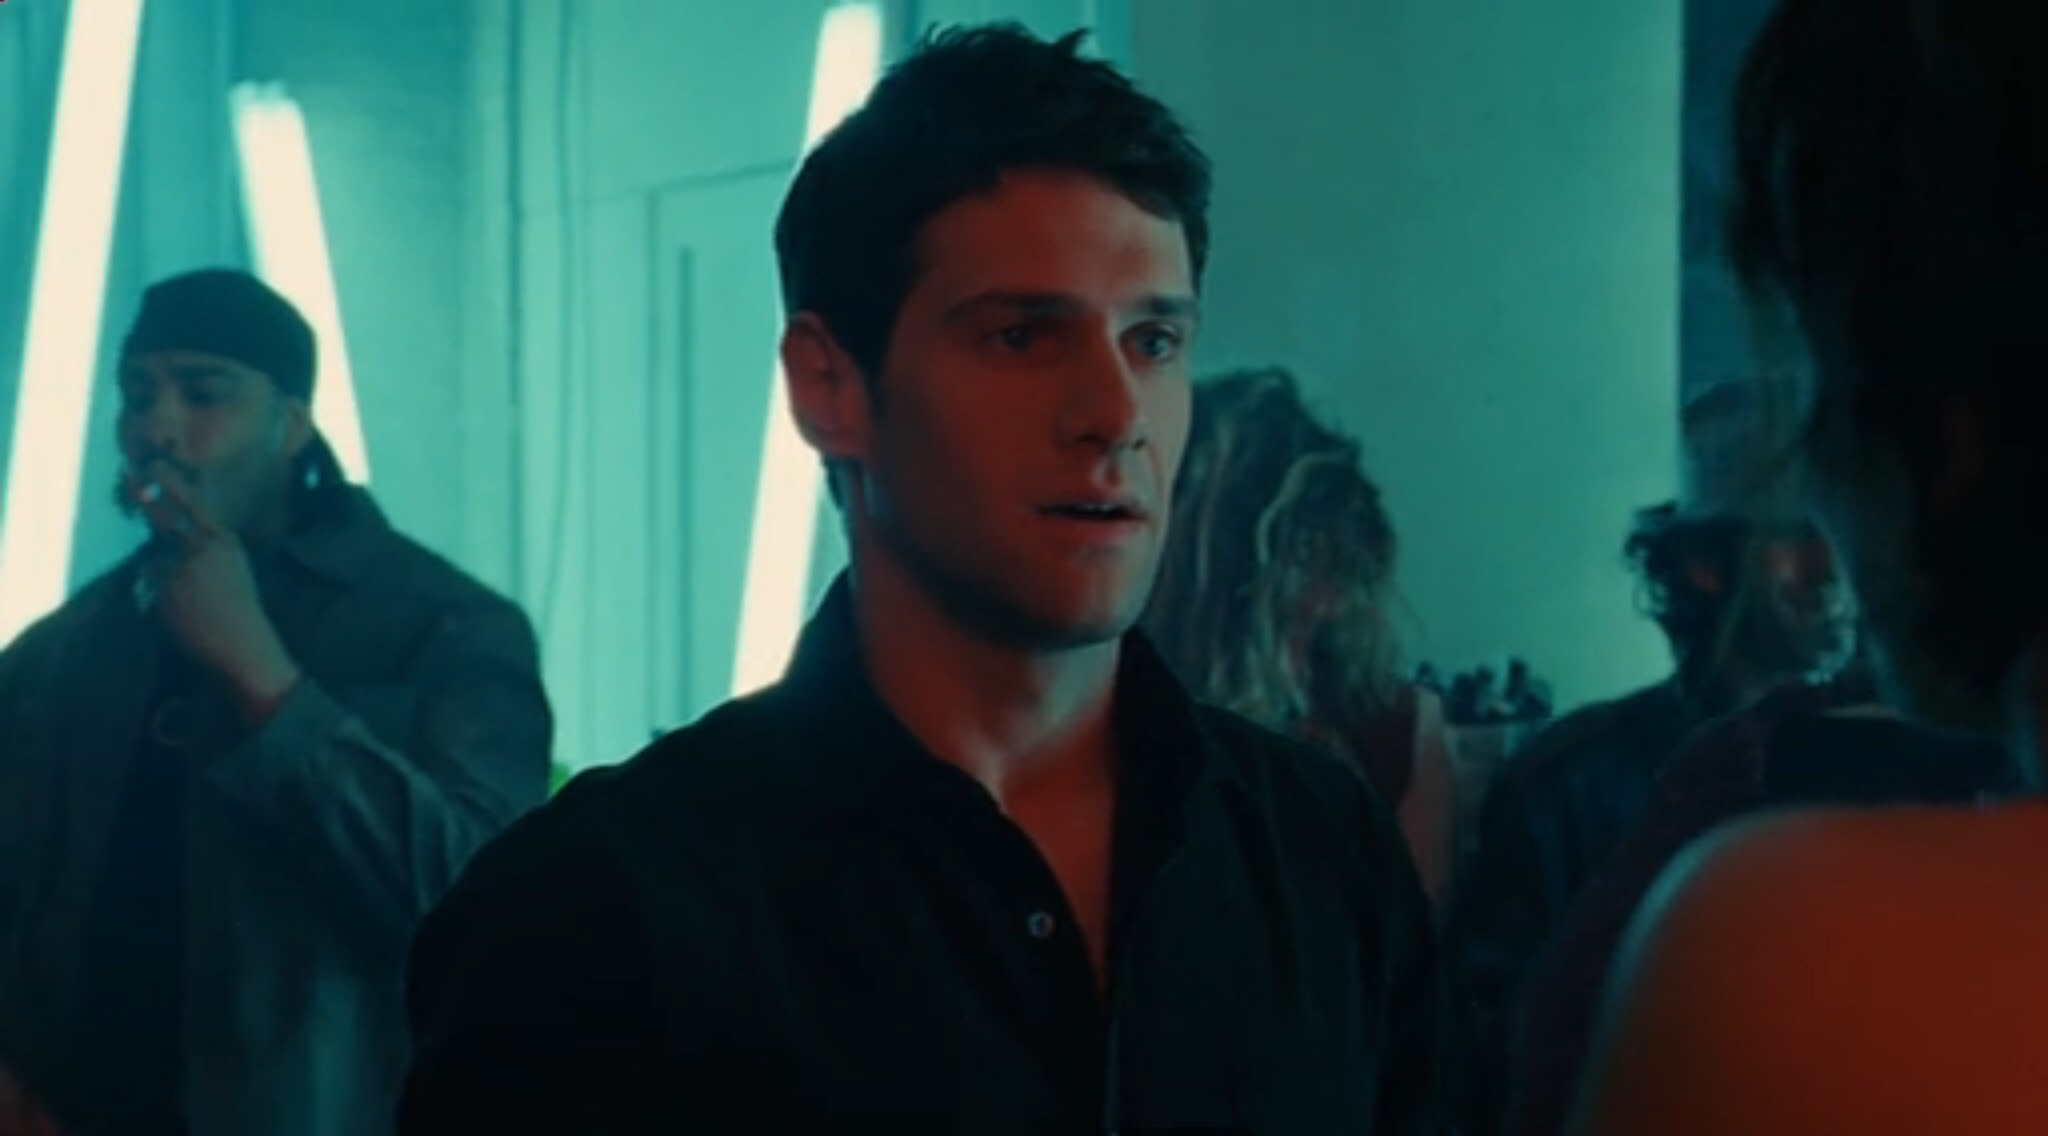 'This is good ish, the craziest place I ever did it...on the dance floor' -The Rebound with Justin Bartha